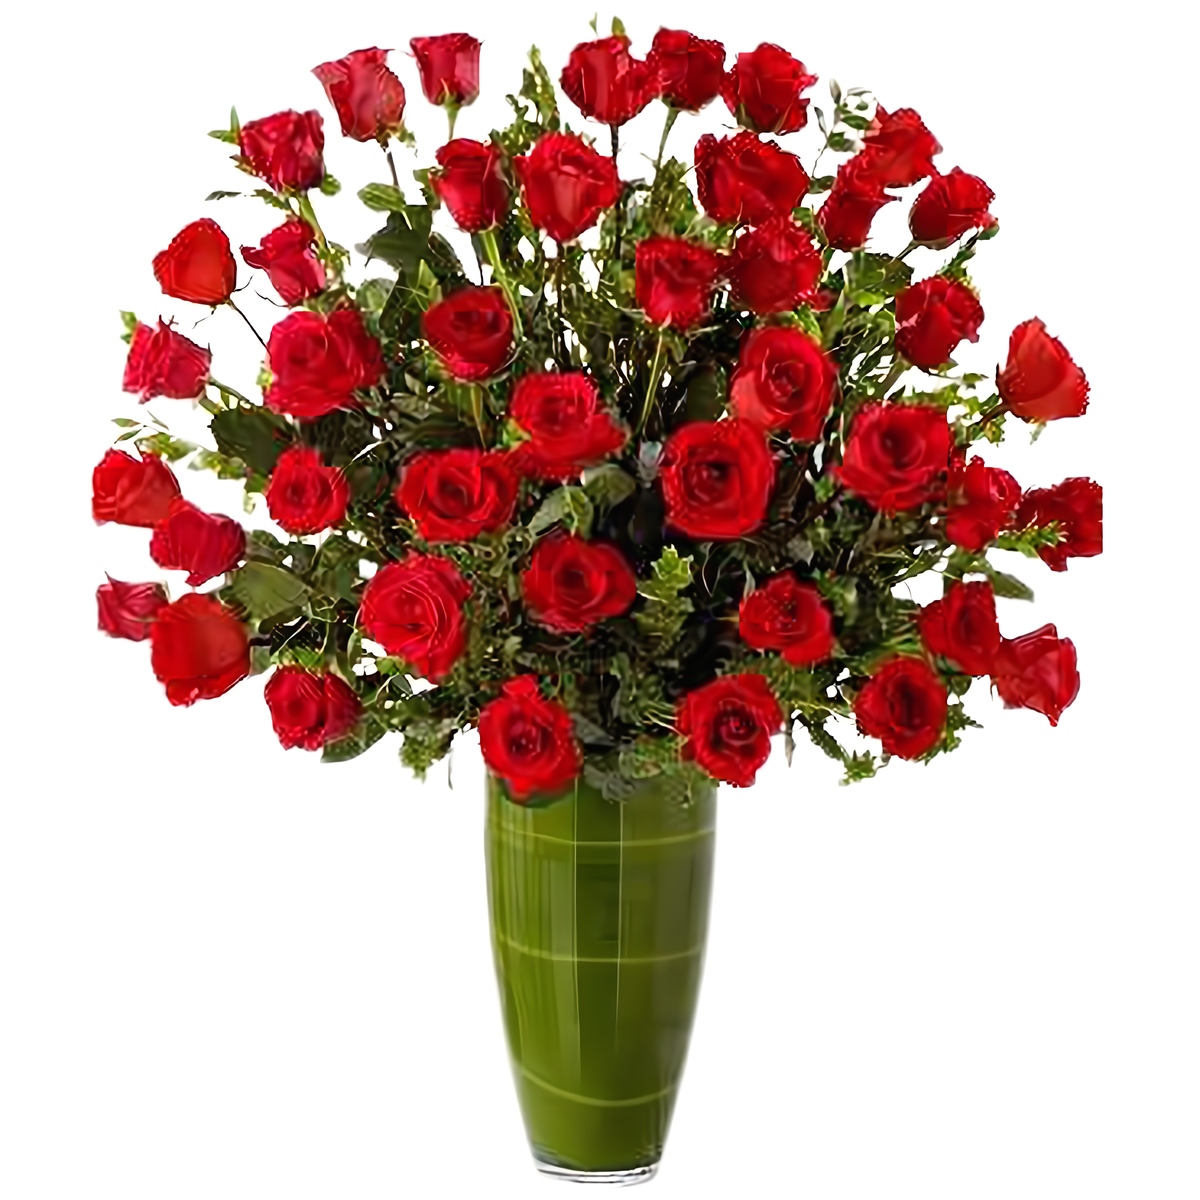 Manhattan Flower Delivery - Luxury Rose Bouquet - 24 Premium Red Long Stem Roses - Products &gt; Luxury Collection